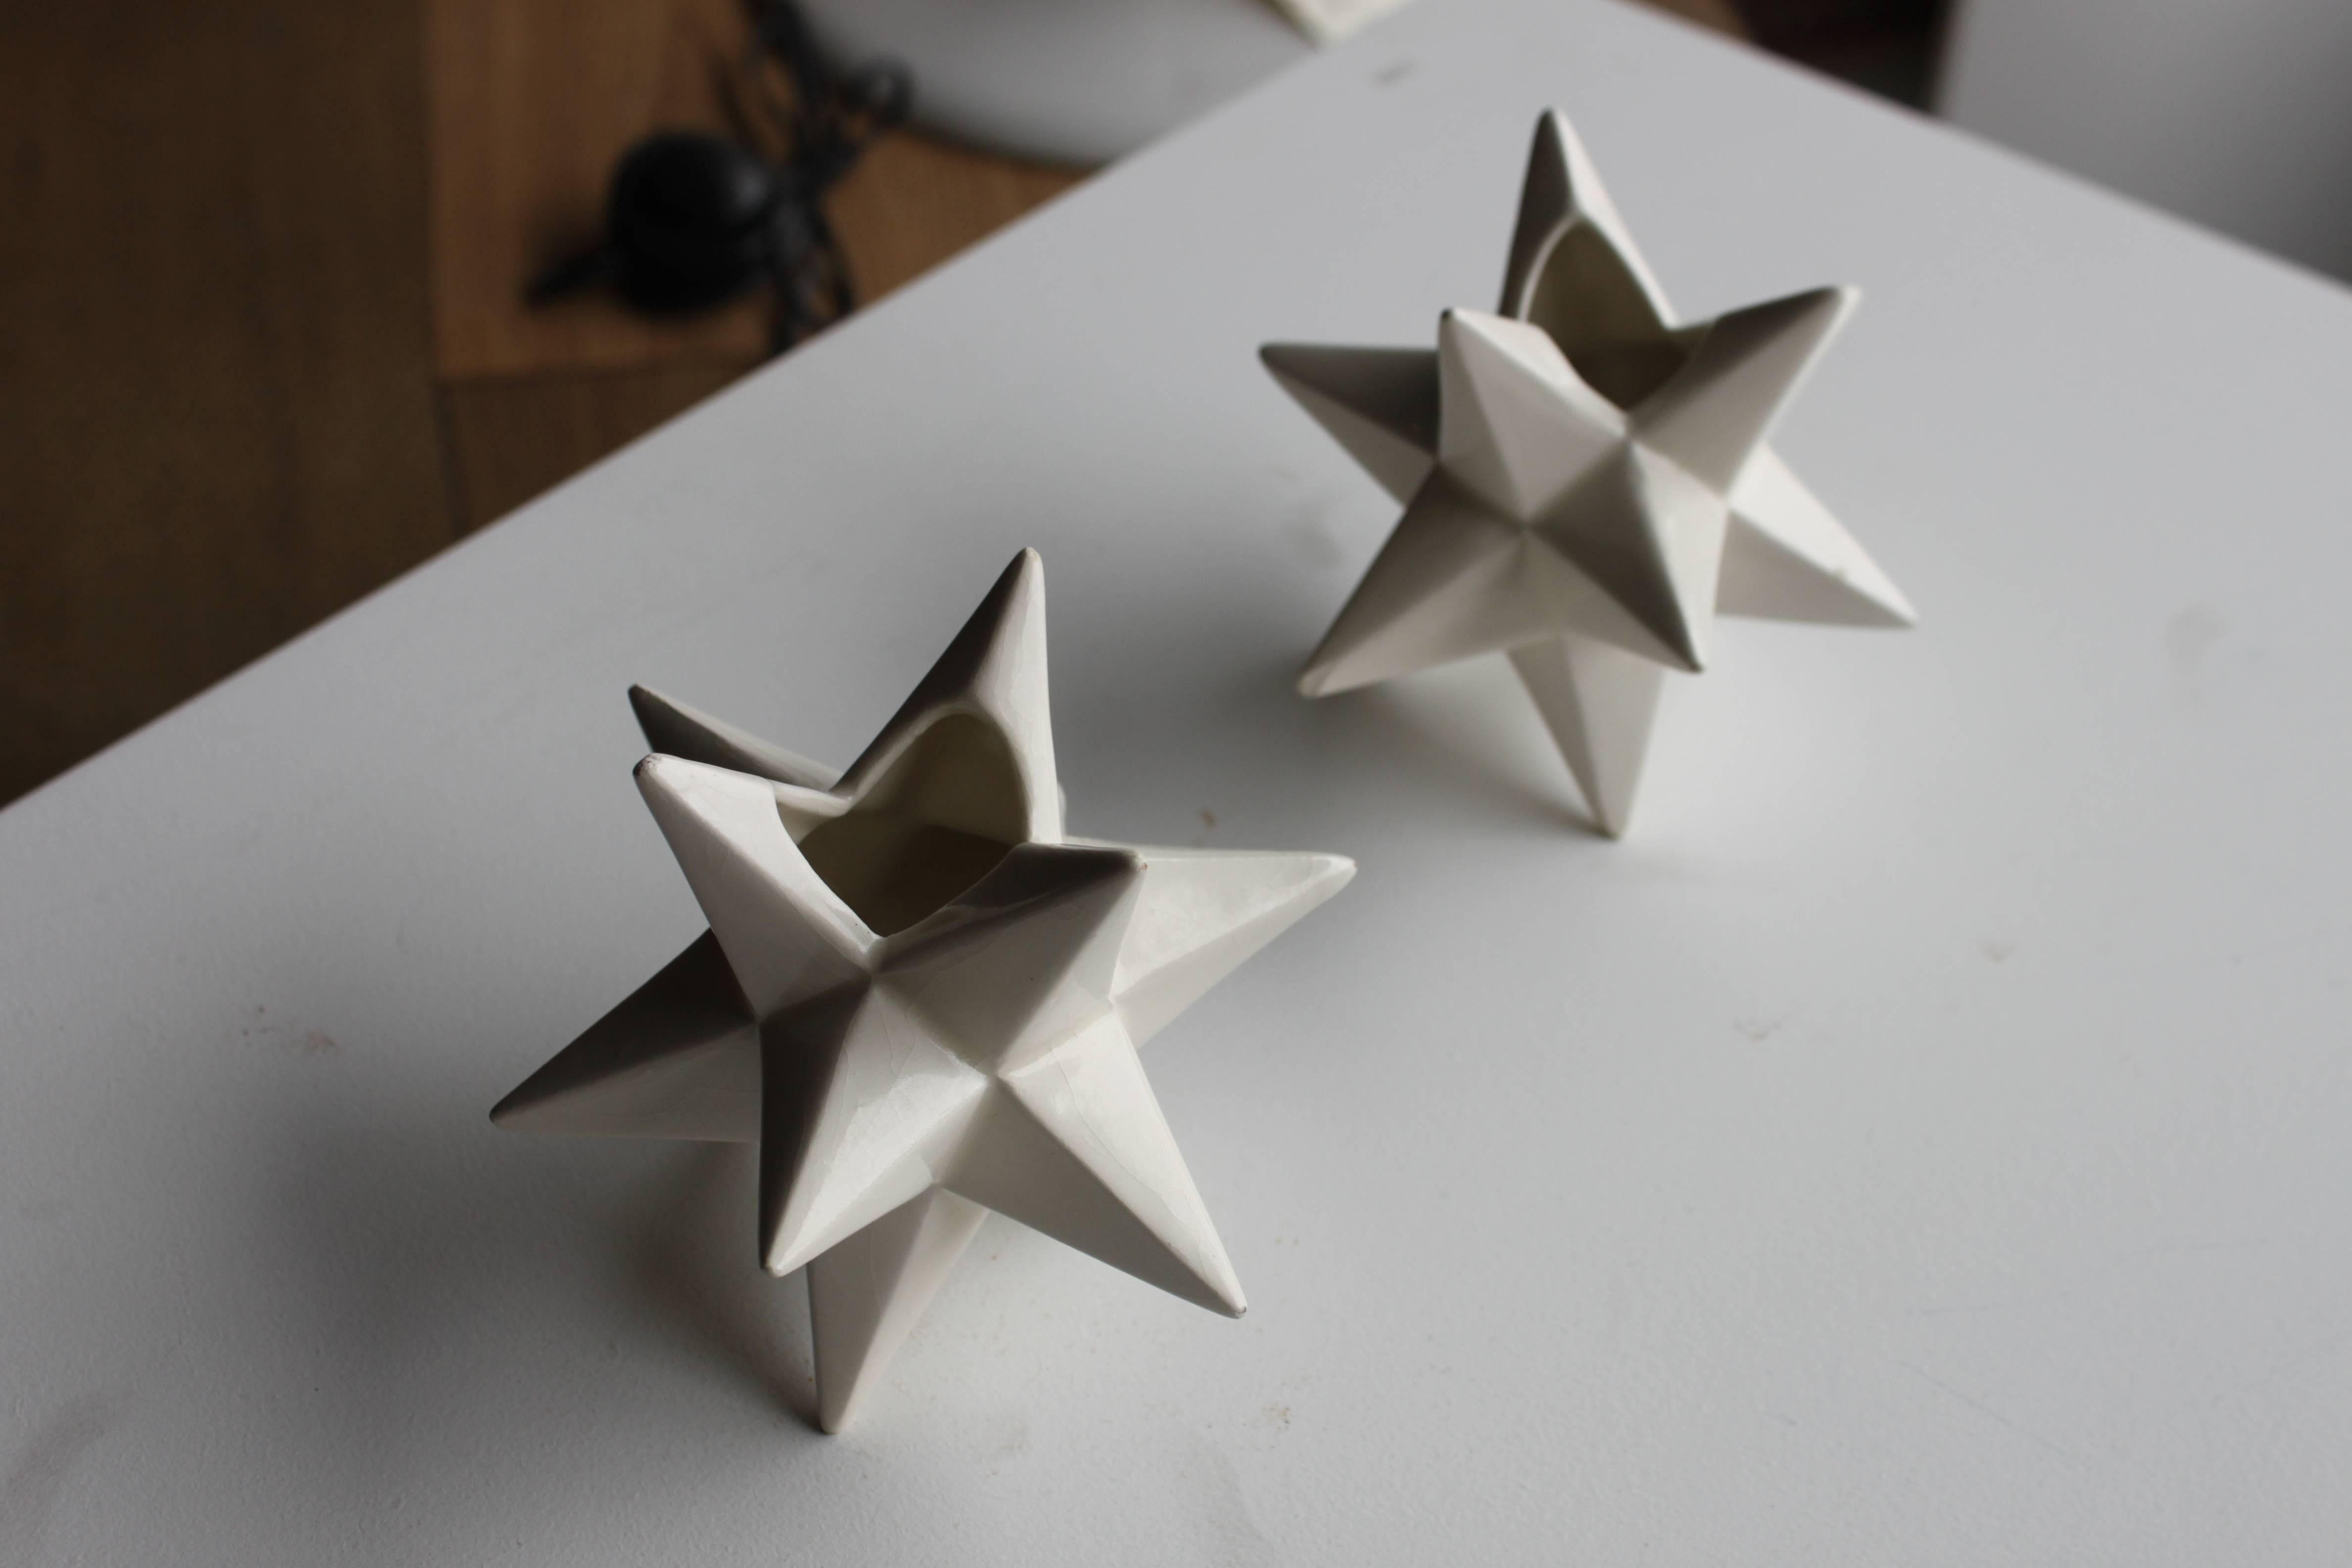 Beautiful unique star shape. Extremely minor loss at tips due to wear.